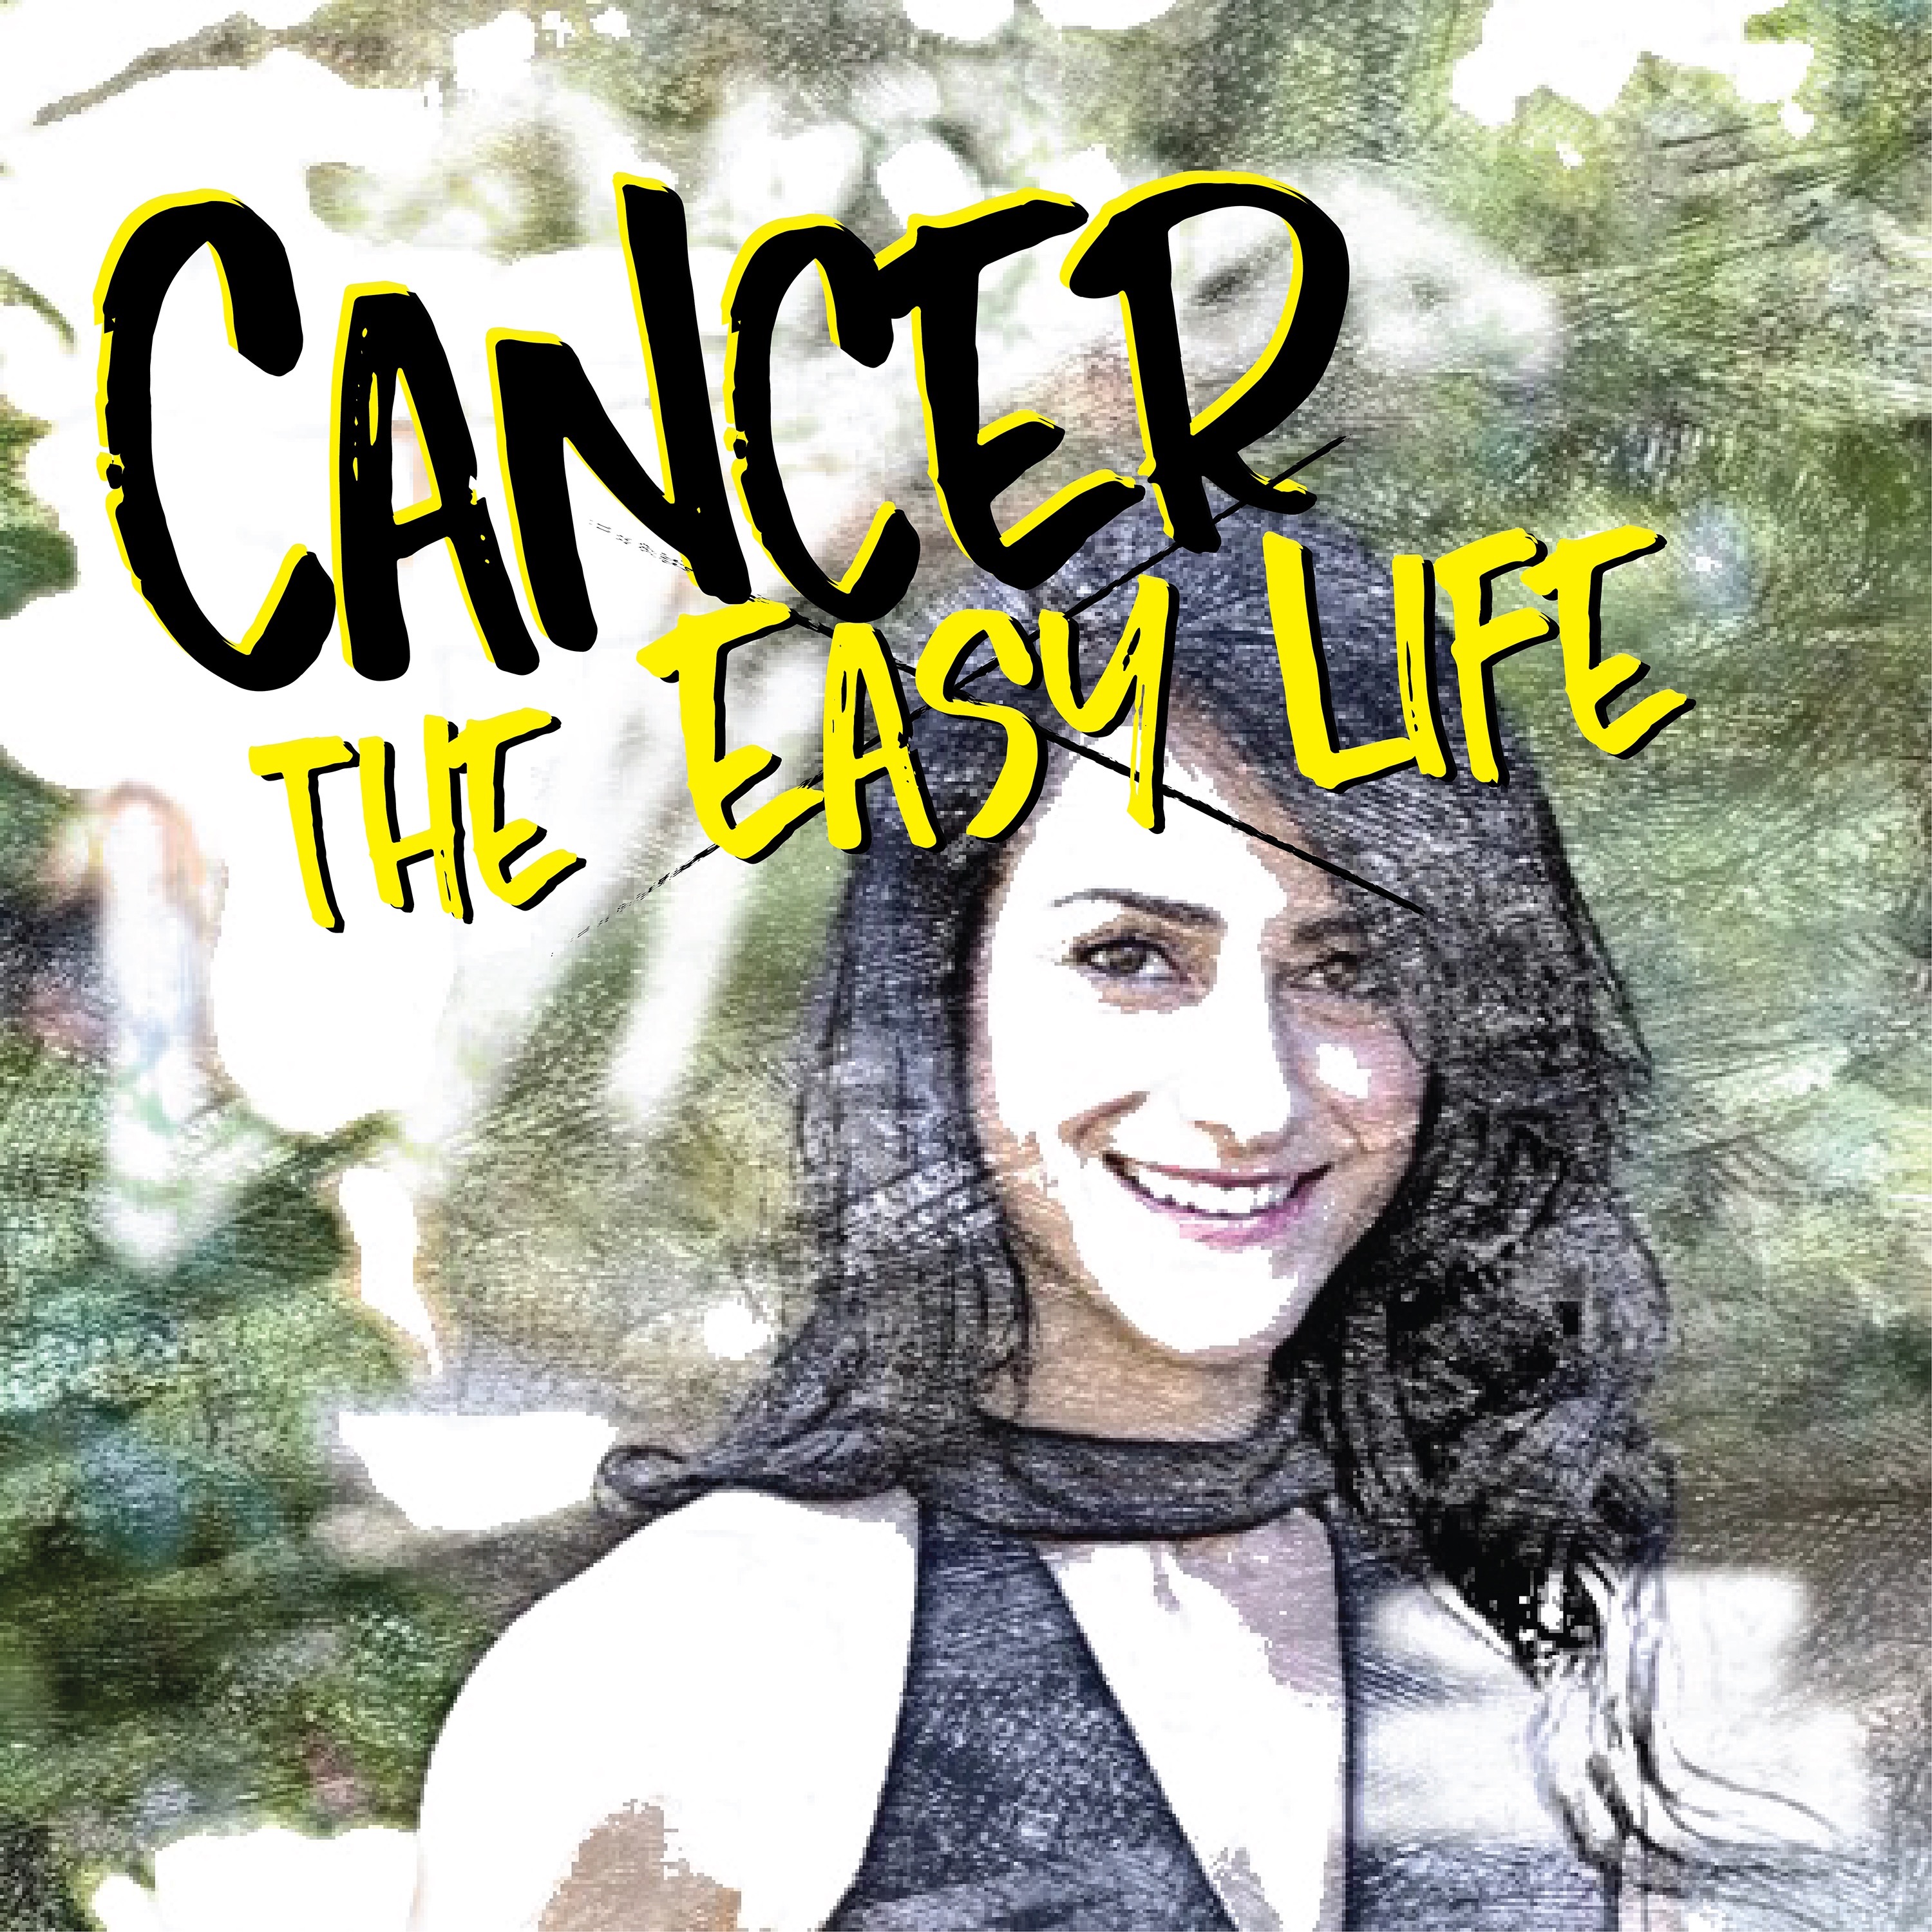 Cancer the easy life.